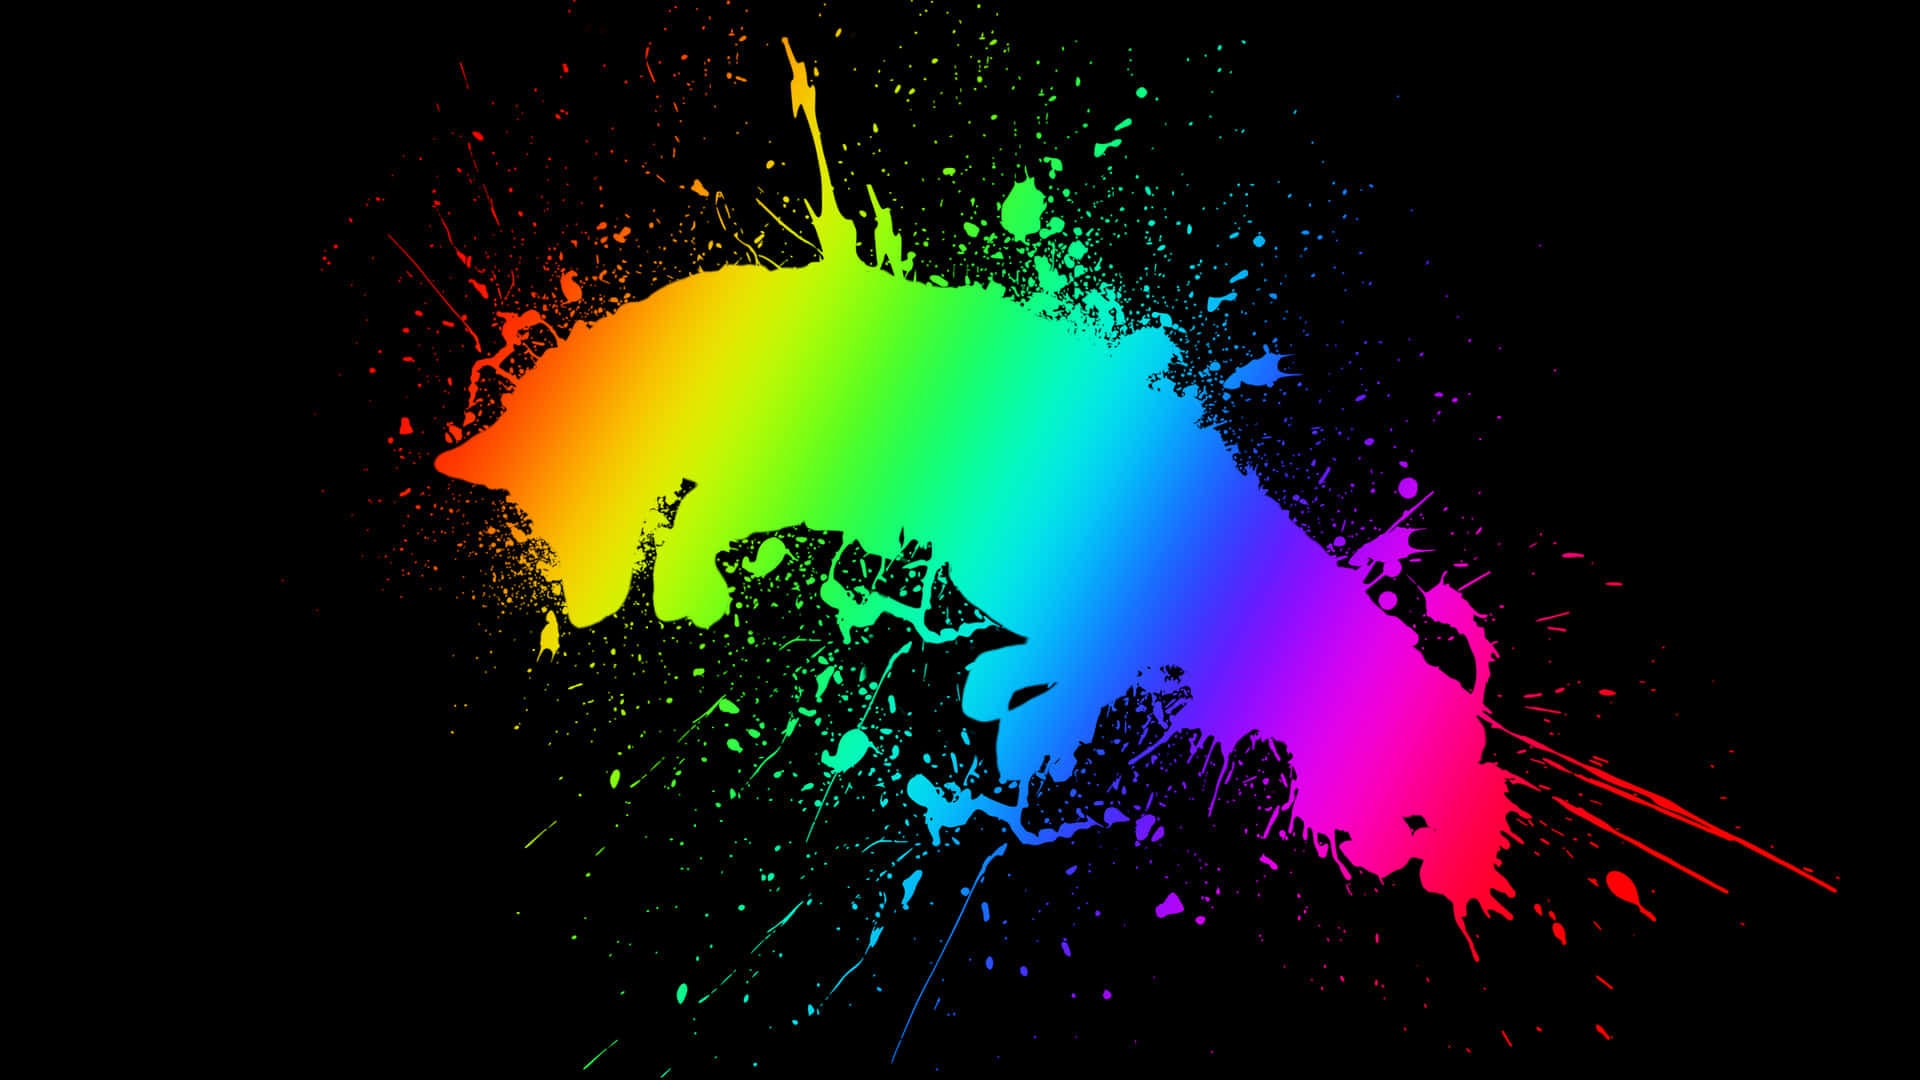 A vibrant and playful RGB abstract background